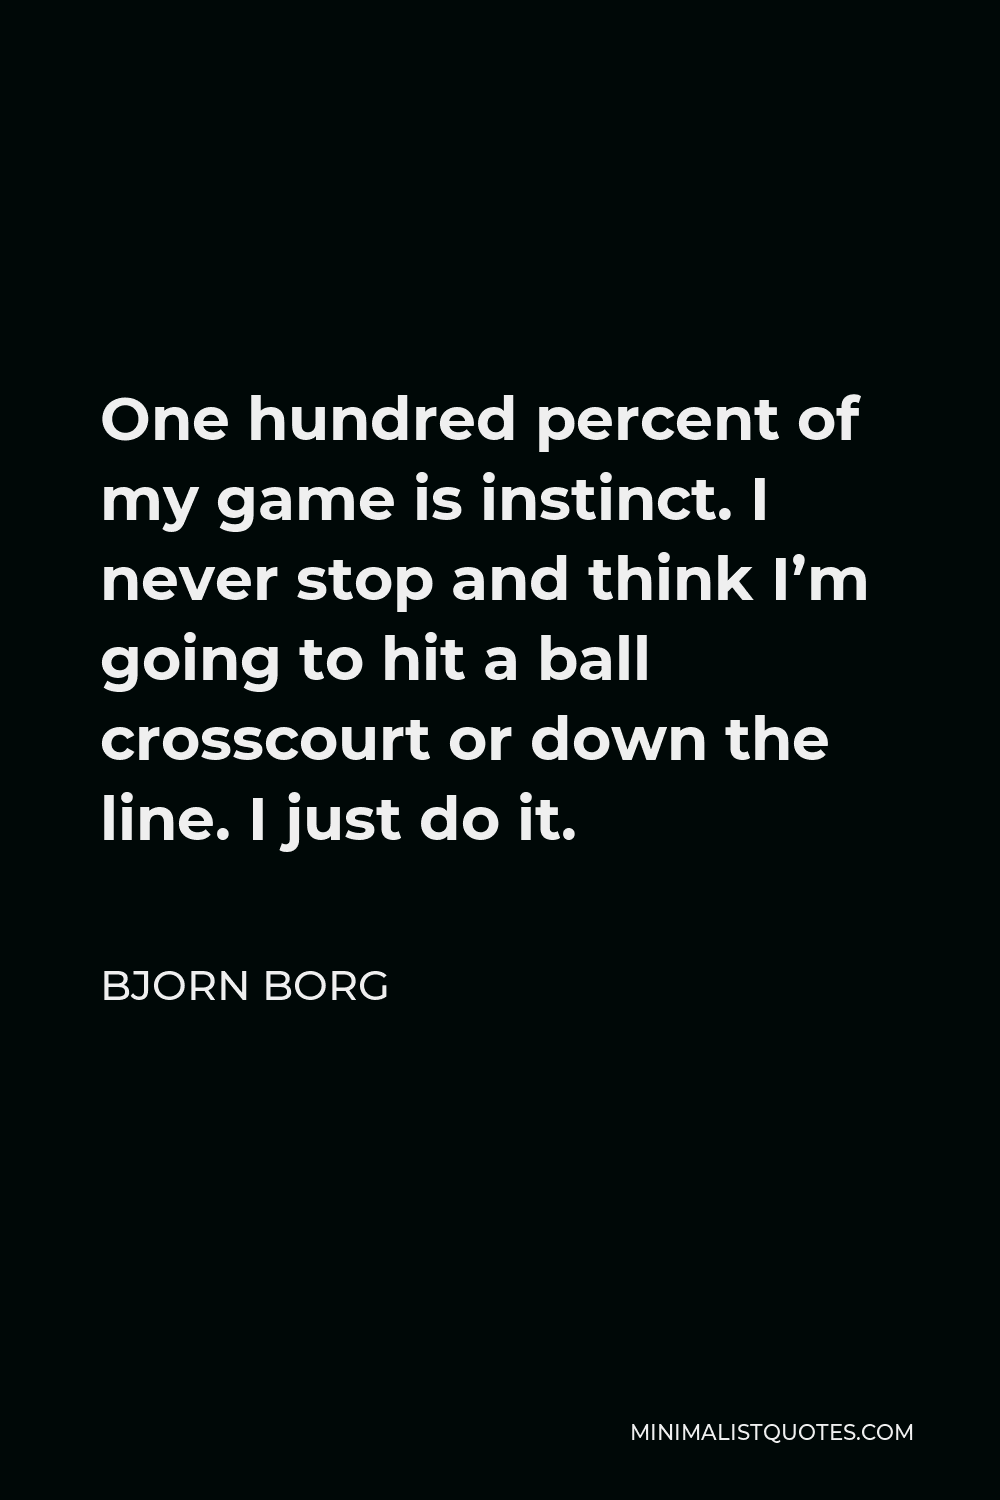 Bjorn Borg Quote - One hundred percent of my game is instinct. I never stop and think I’m going to hit a ball crosscourt or down the line. I just do it.